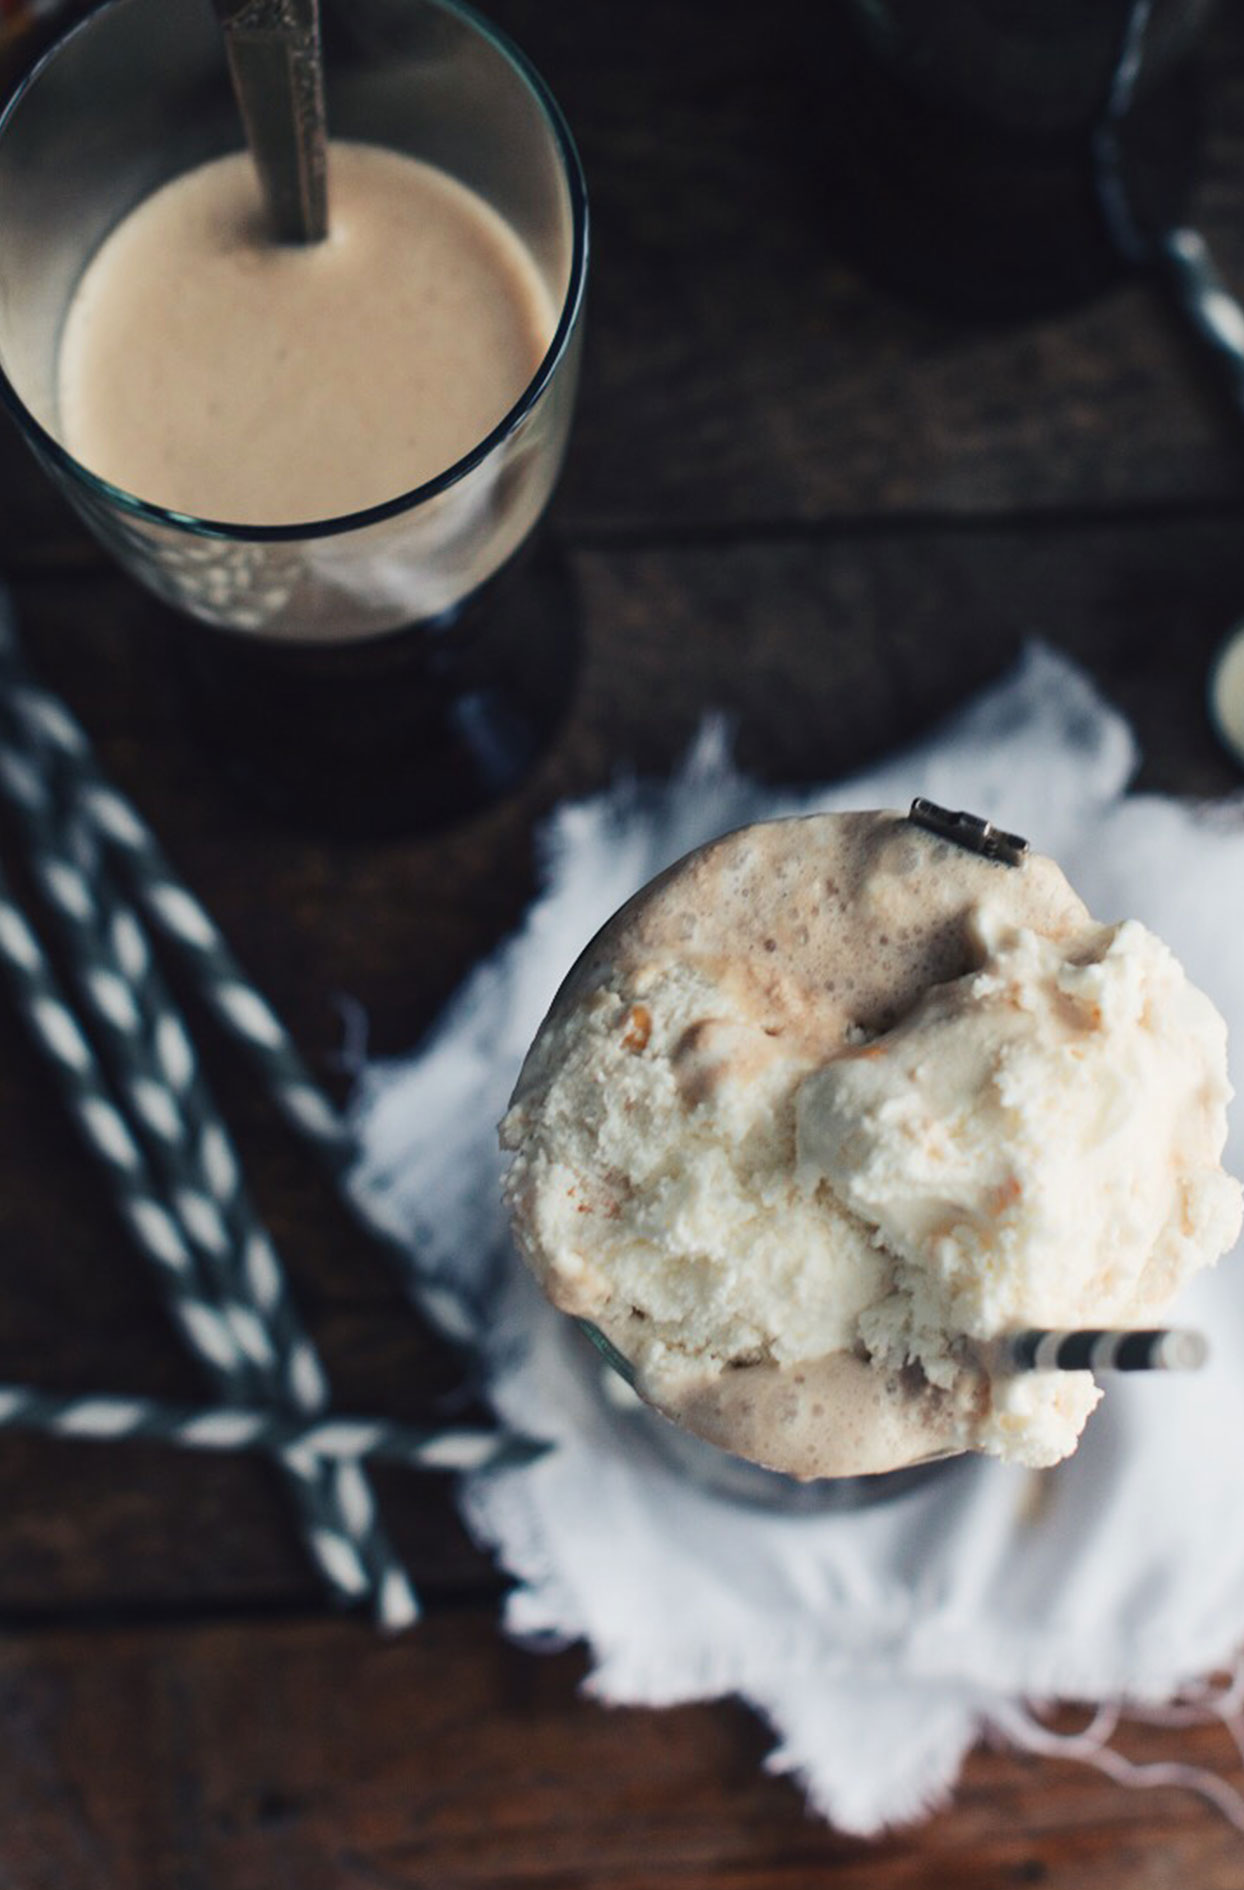 Black beer floater with baileys and caramel ice cream